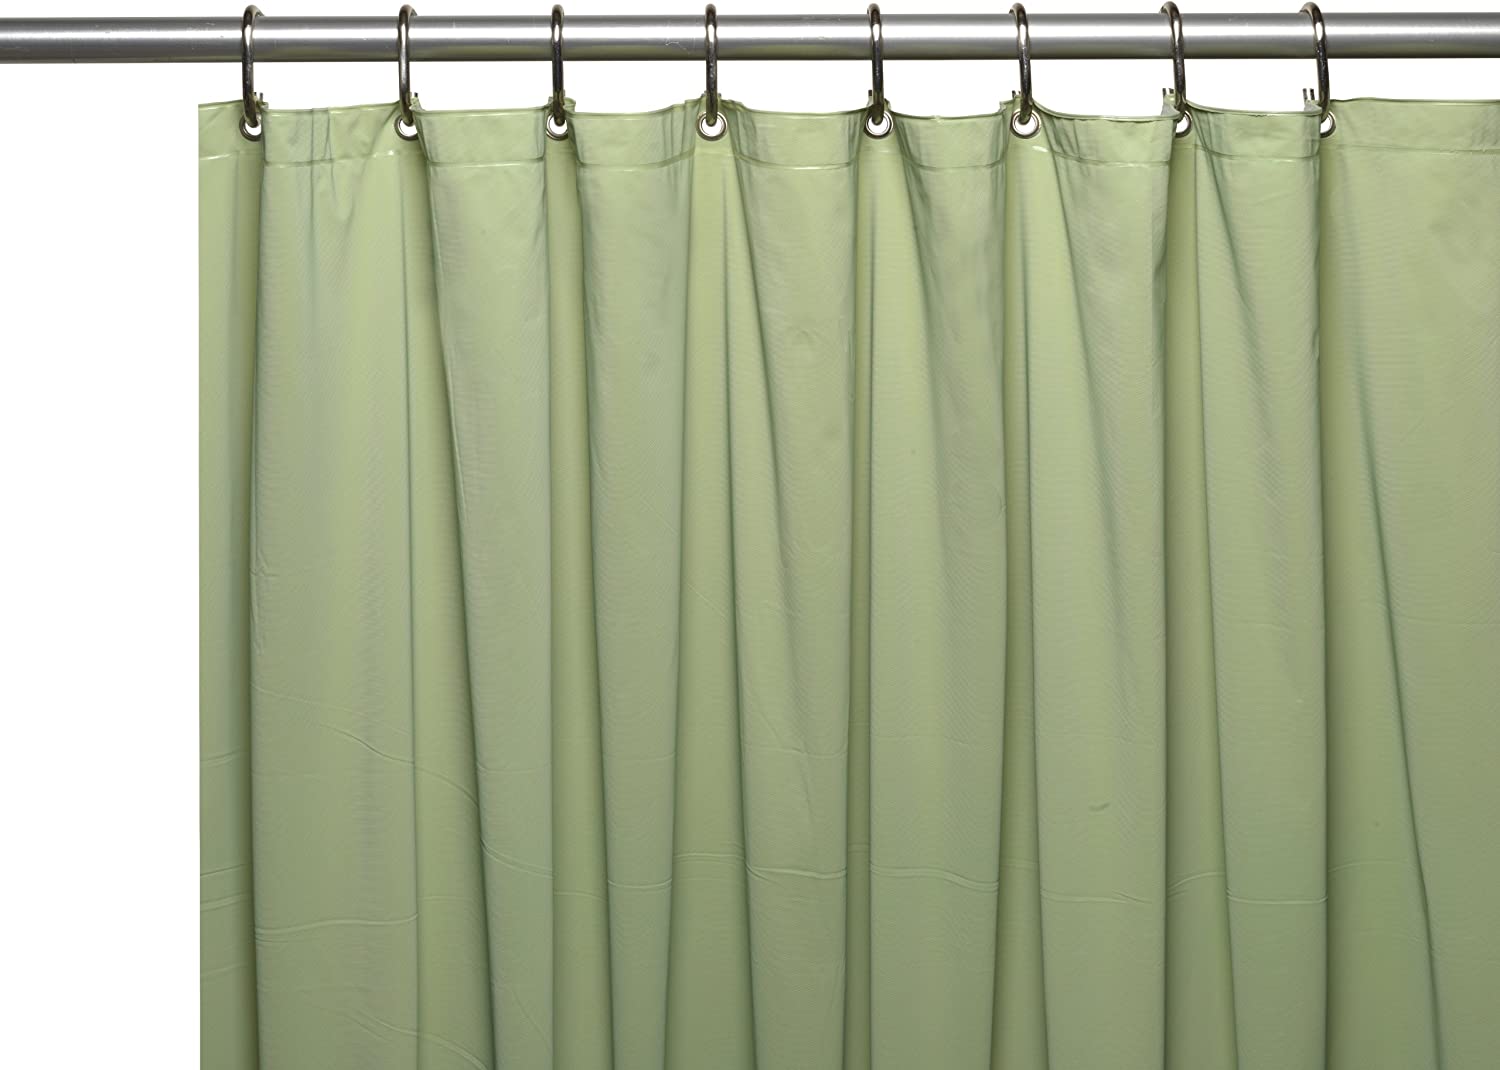 5 Gauge Vinyl Shower Curtain Liner, What Size Is Extra Long Shower Curtain